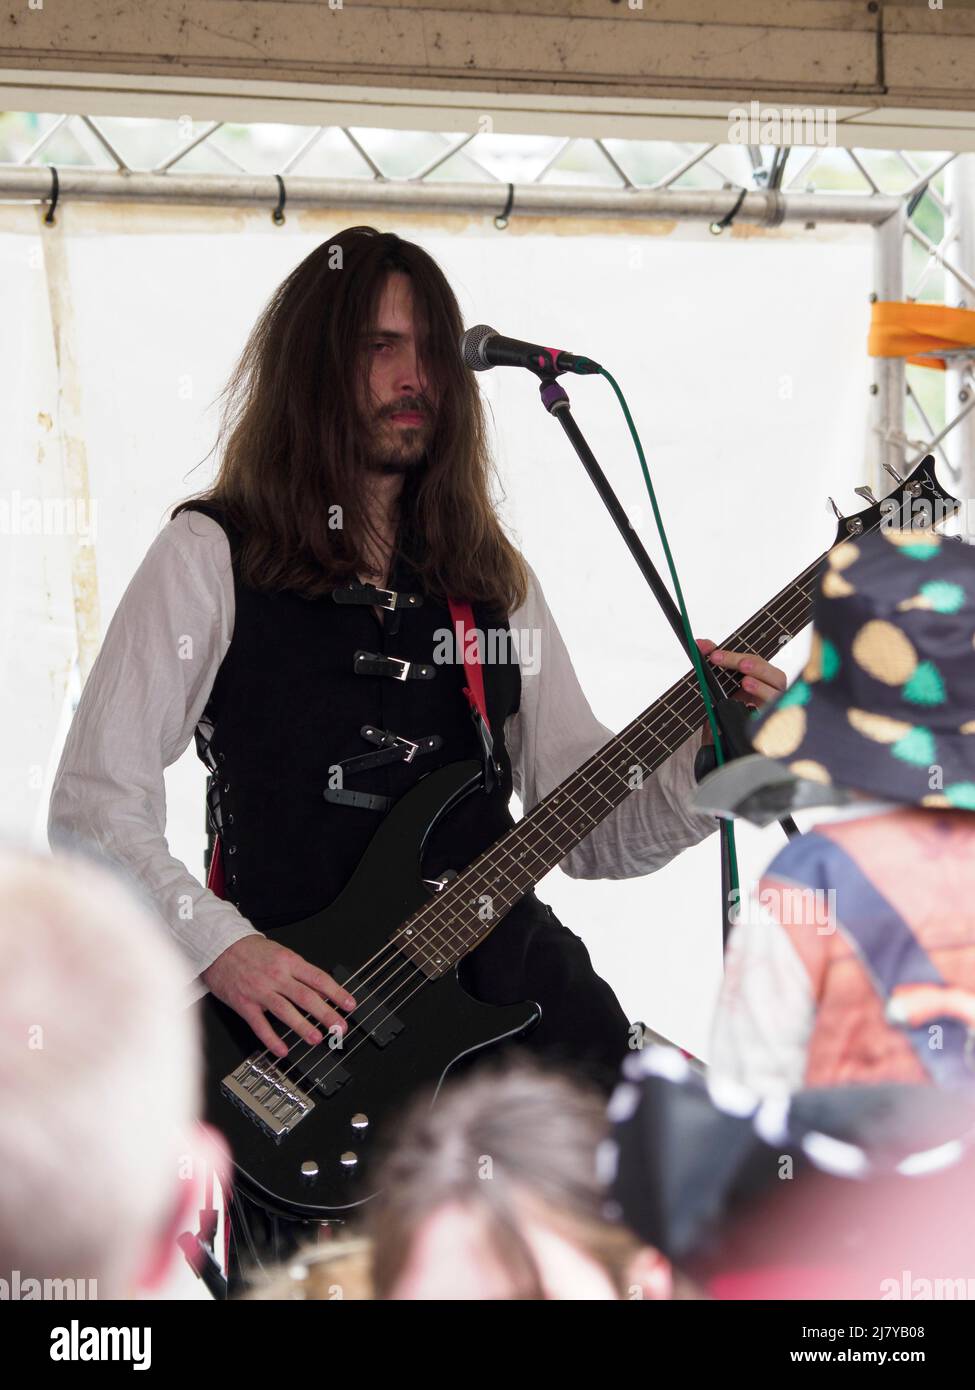 Bass guitarist of The Filthy Spectacula band playing at the Brixham Pirate Festival 2022, Devon, UK Stock Photo